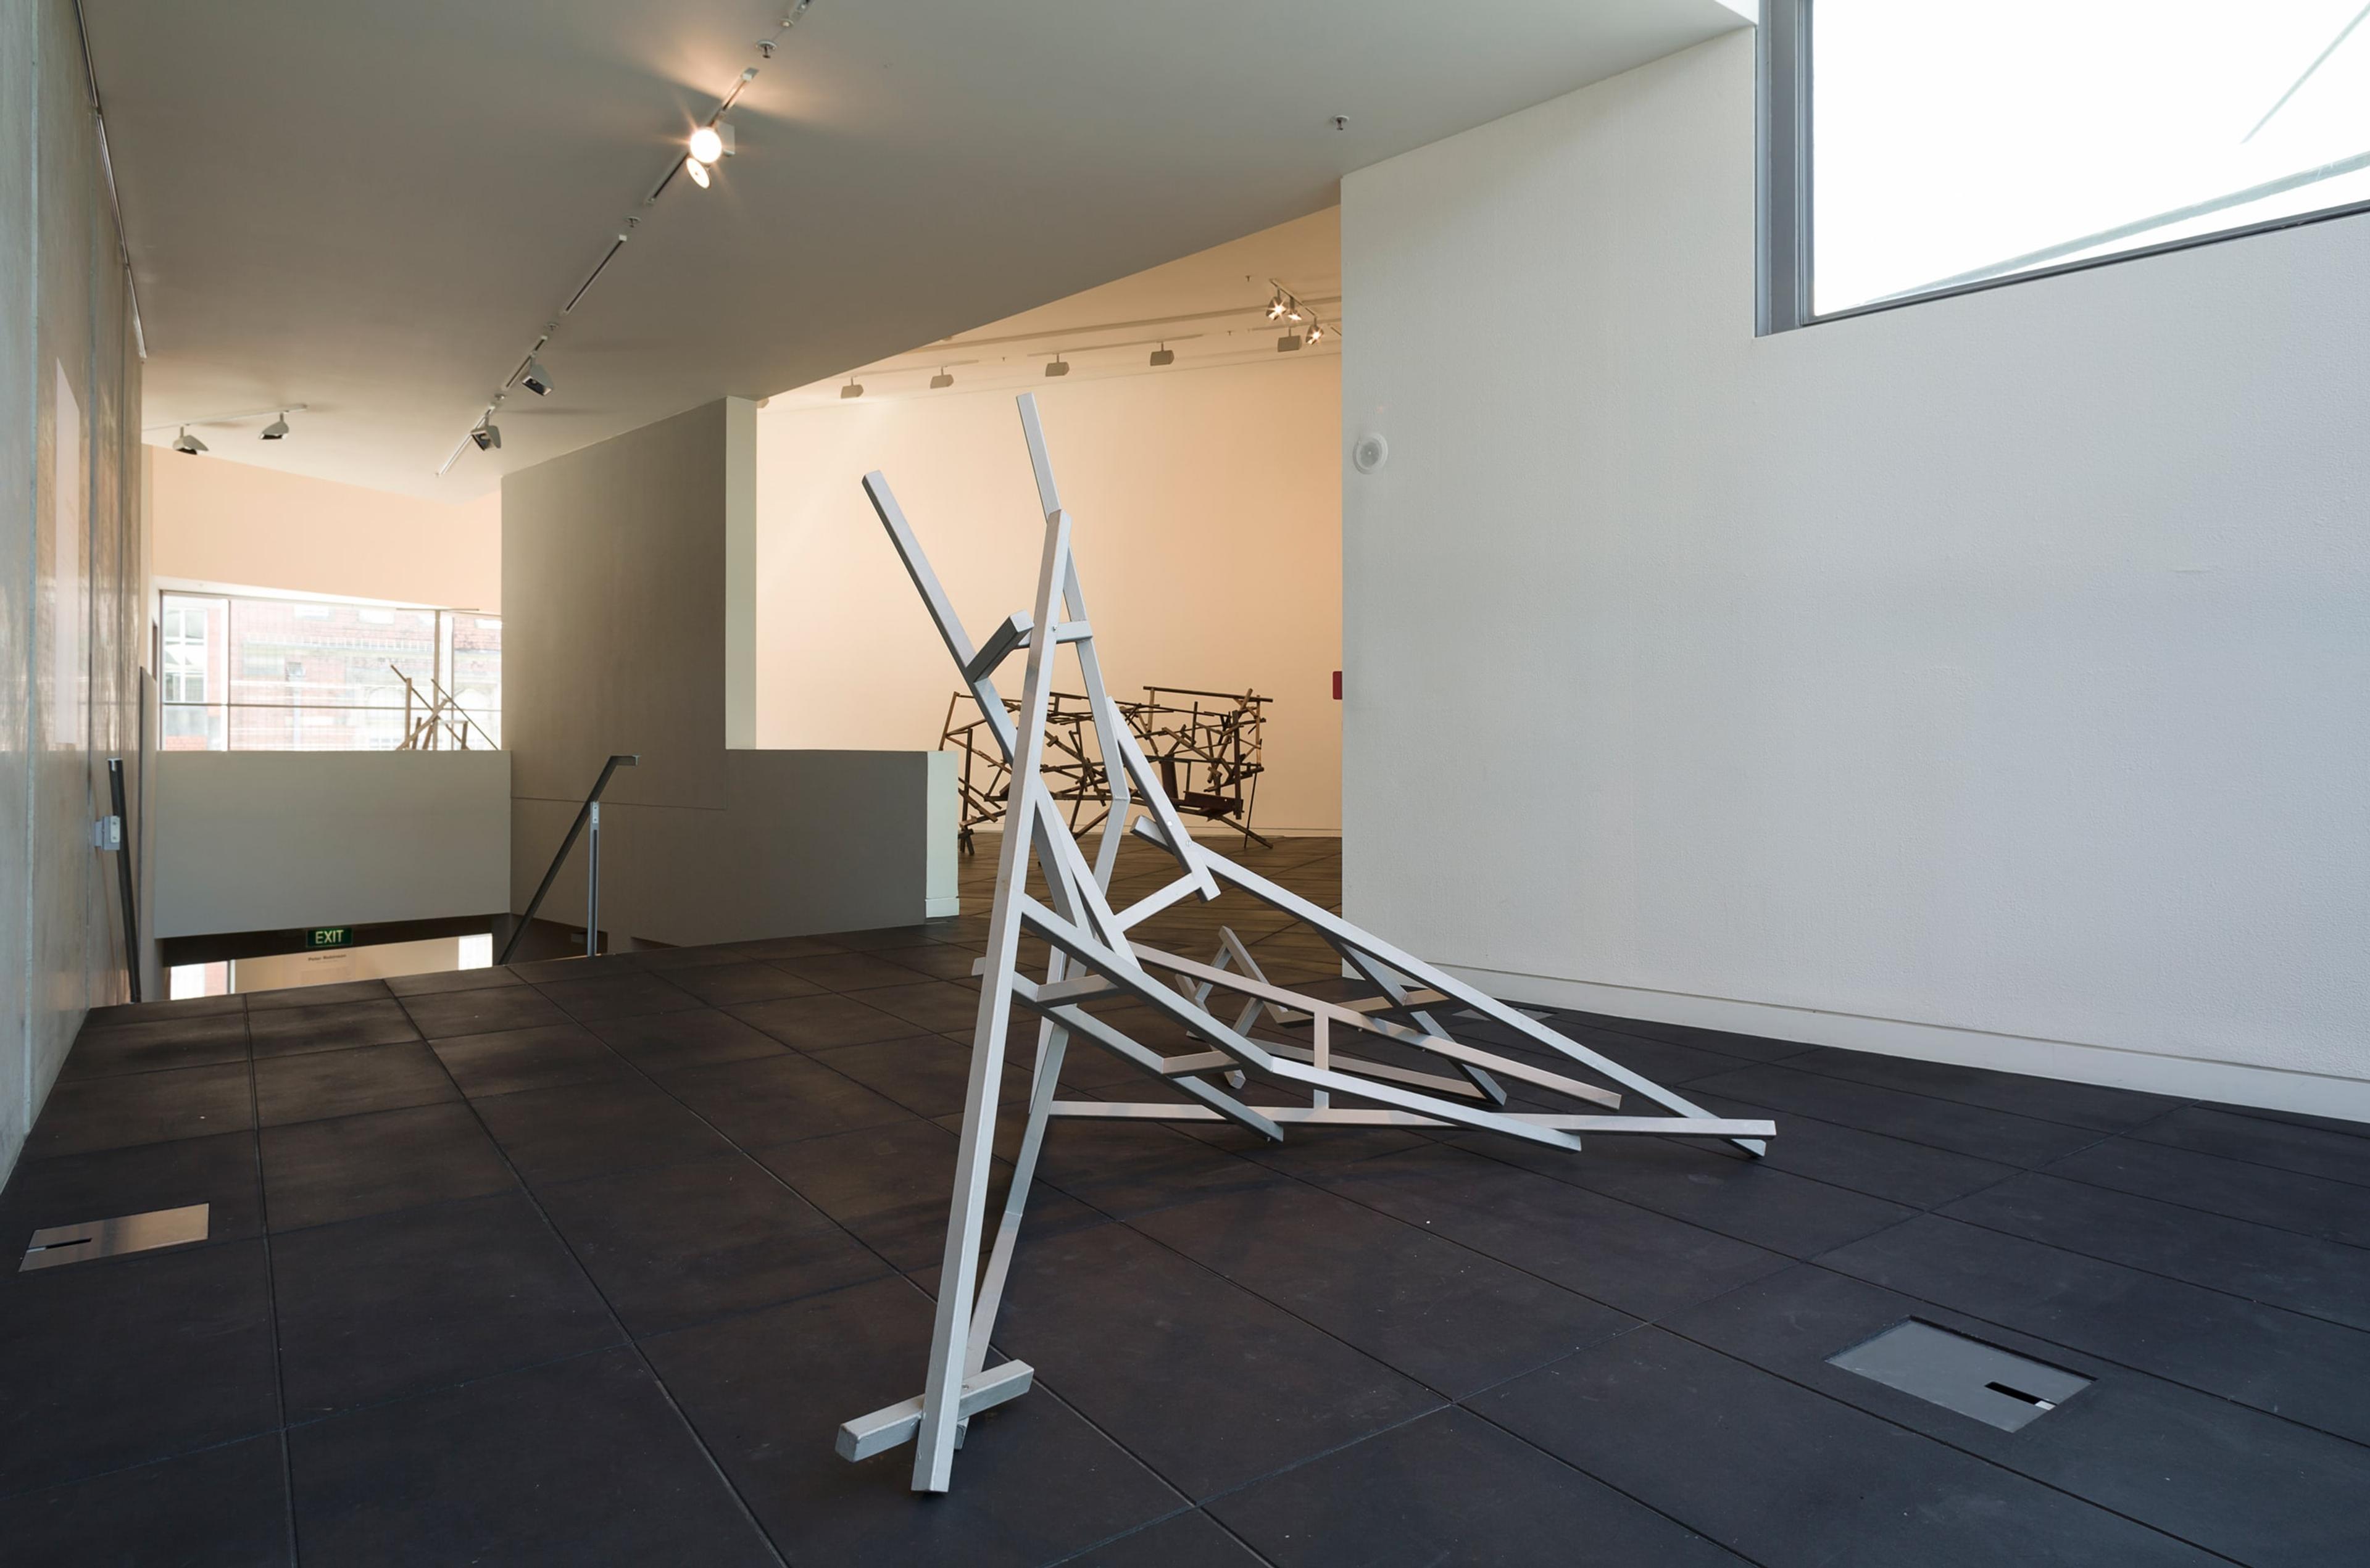 Installation view of John Panting: Spatial Constructions at the Adam Art Gallery, showing 5.12 (Untitled V) , 1972–73, steel, 183 x 305 x 152cm. Collection of Christchurch Art Gallery Te Puna o Waiwhetu. Photo: Shaun Waugh.